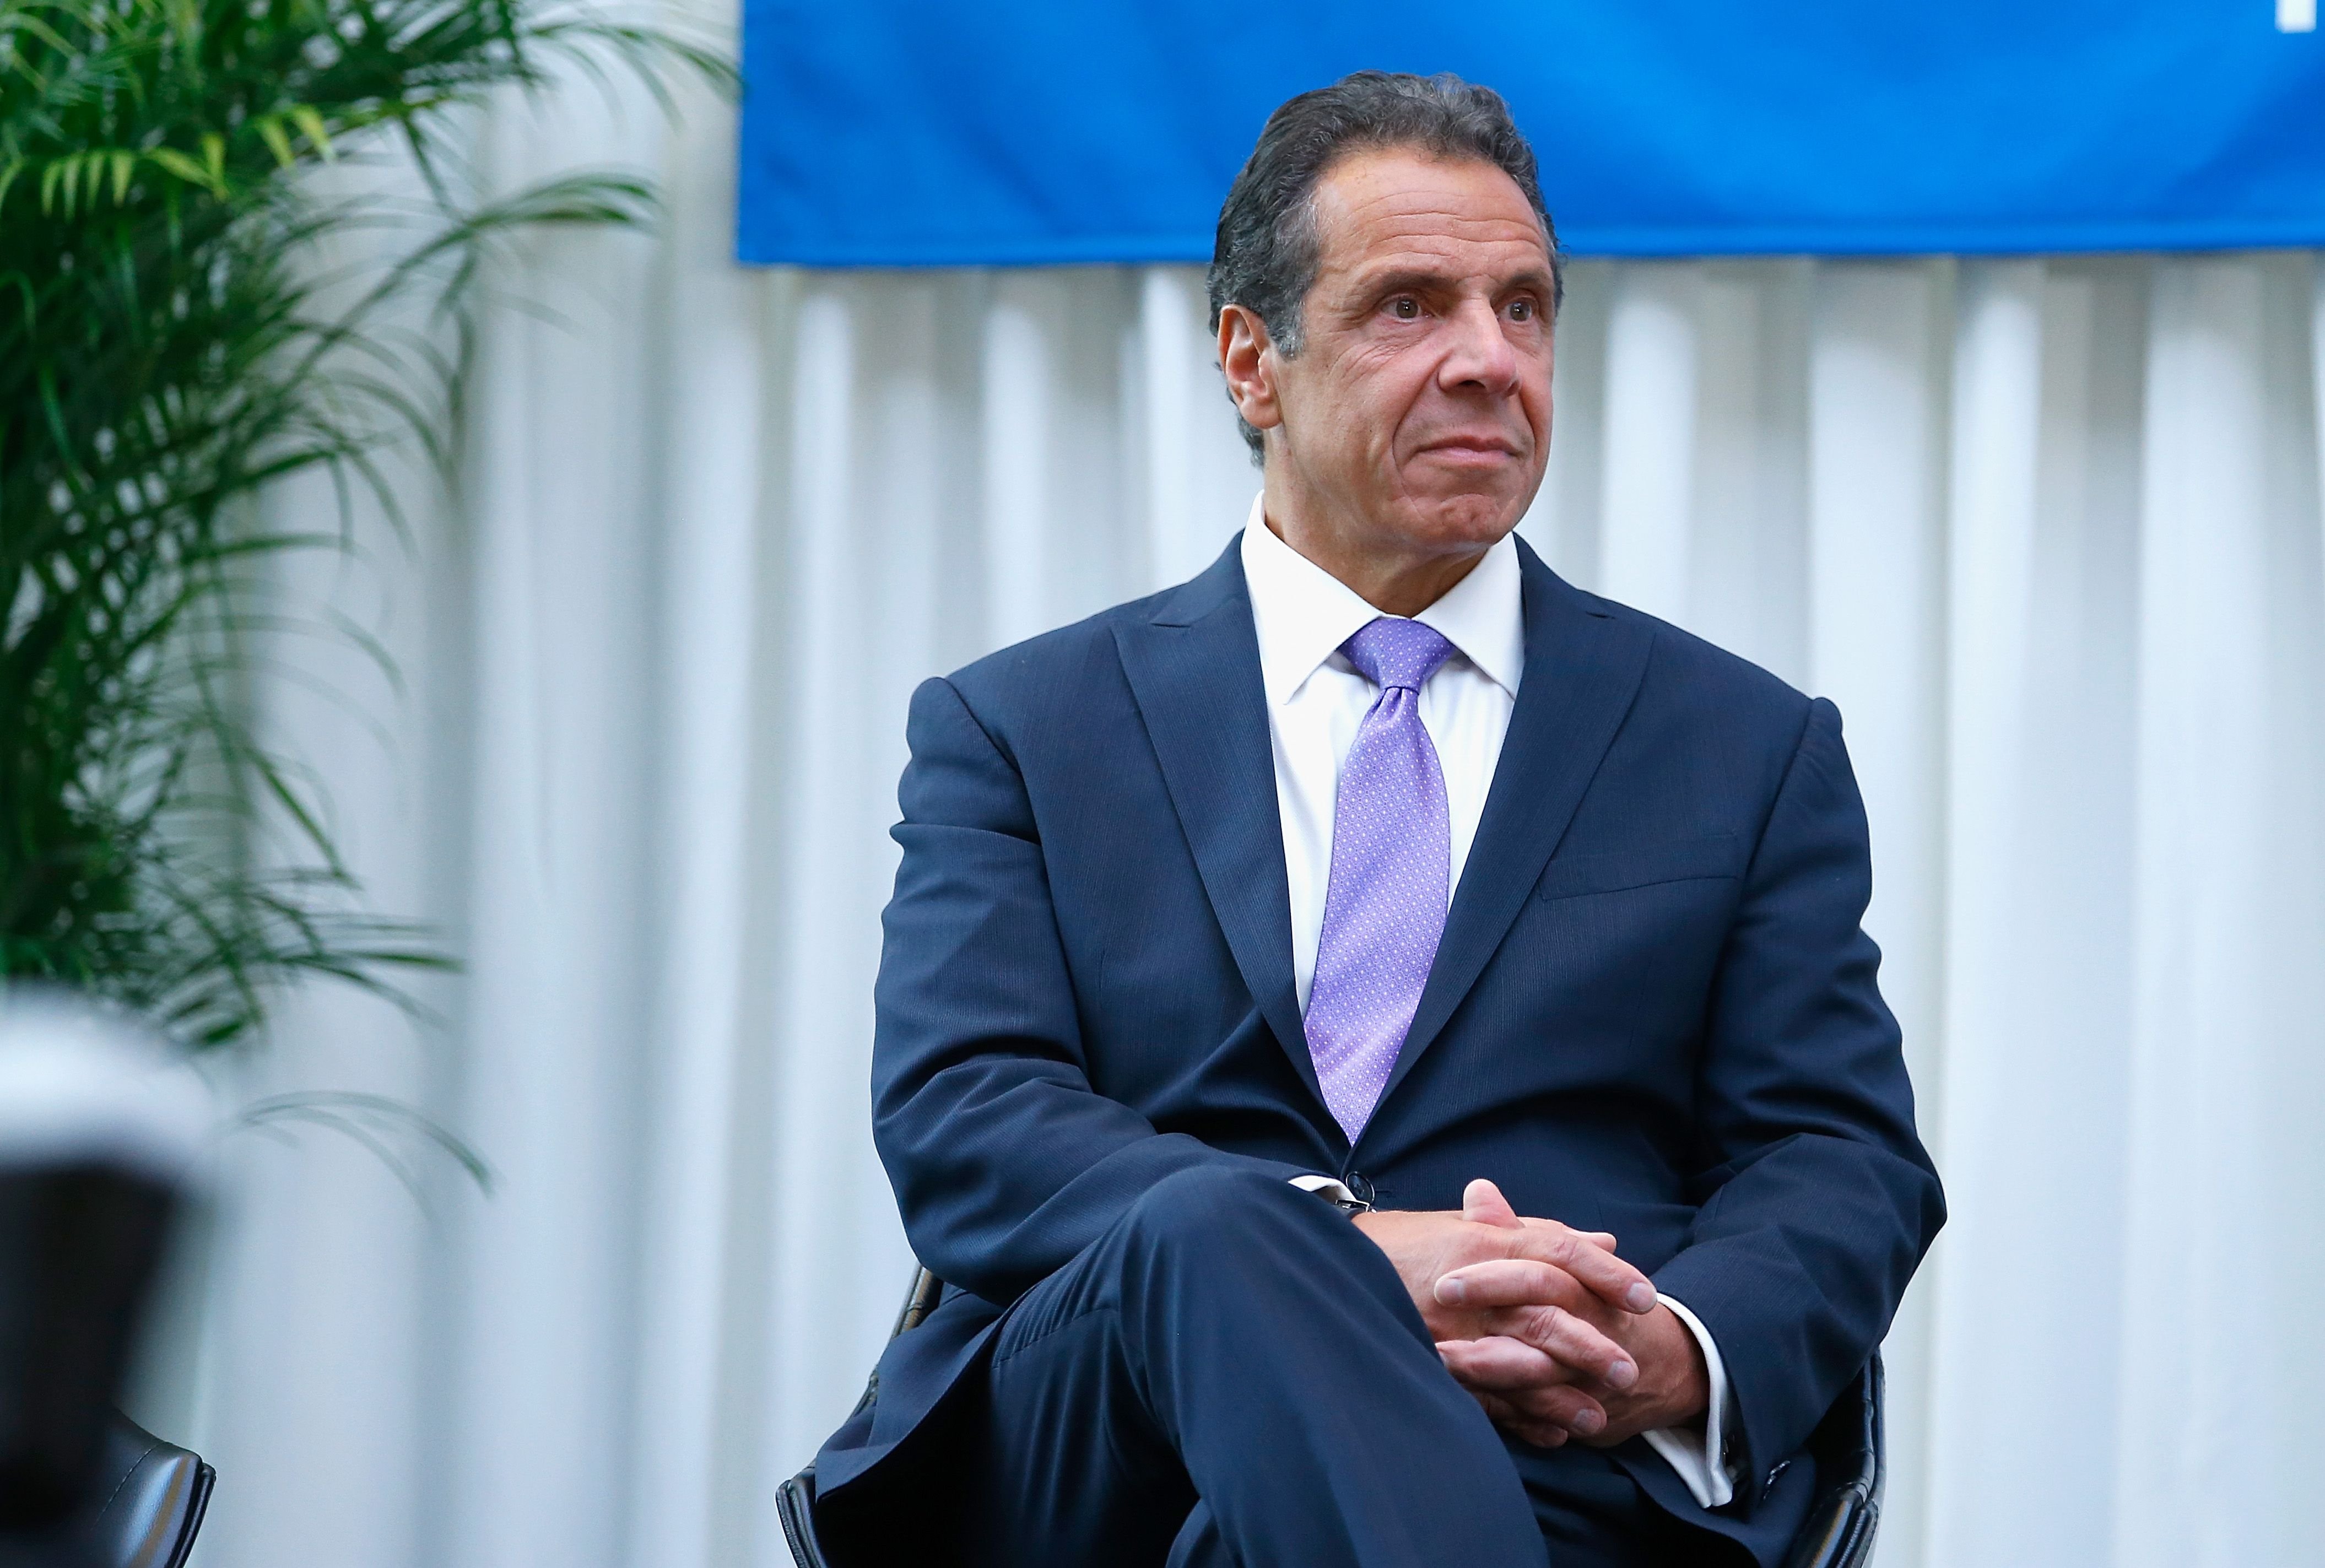 New York State Governor, Andrew Cuomo at the Madison Square Garden celebration of Billy Joel's 100th lifetime show at Madison Square Garden on July 18, 2018 | Photo: Getty Images